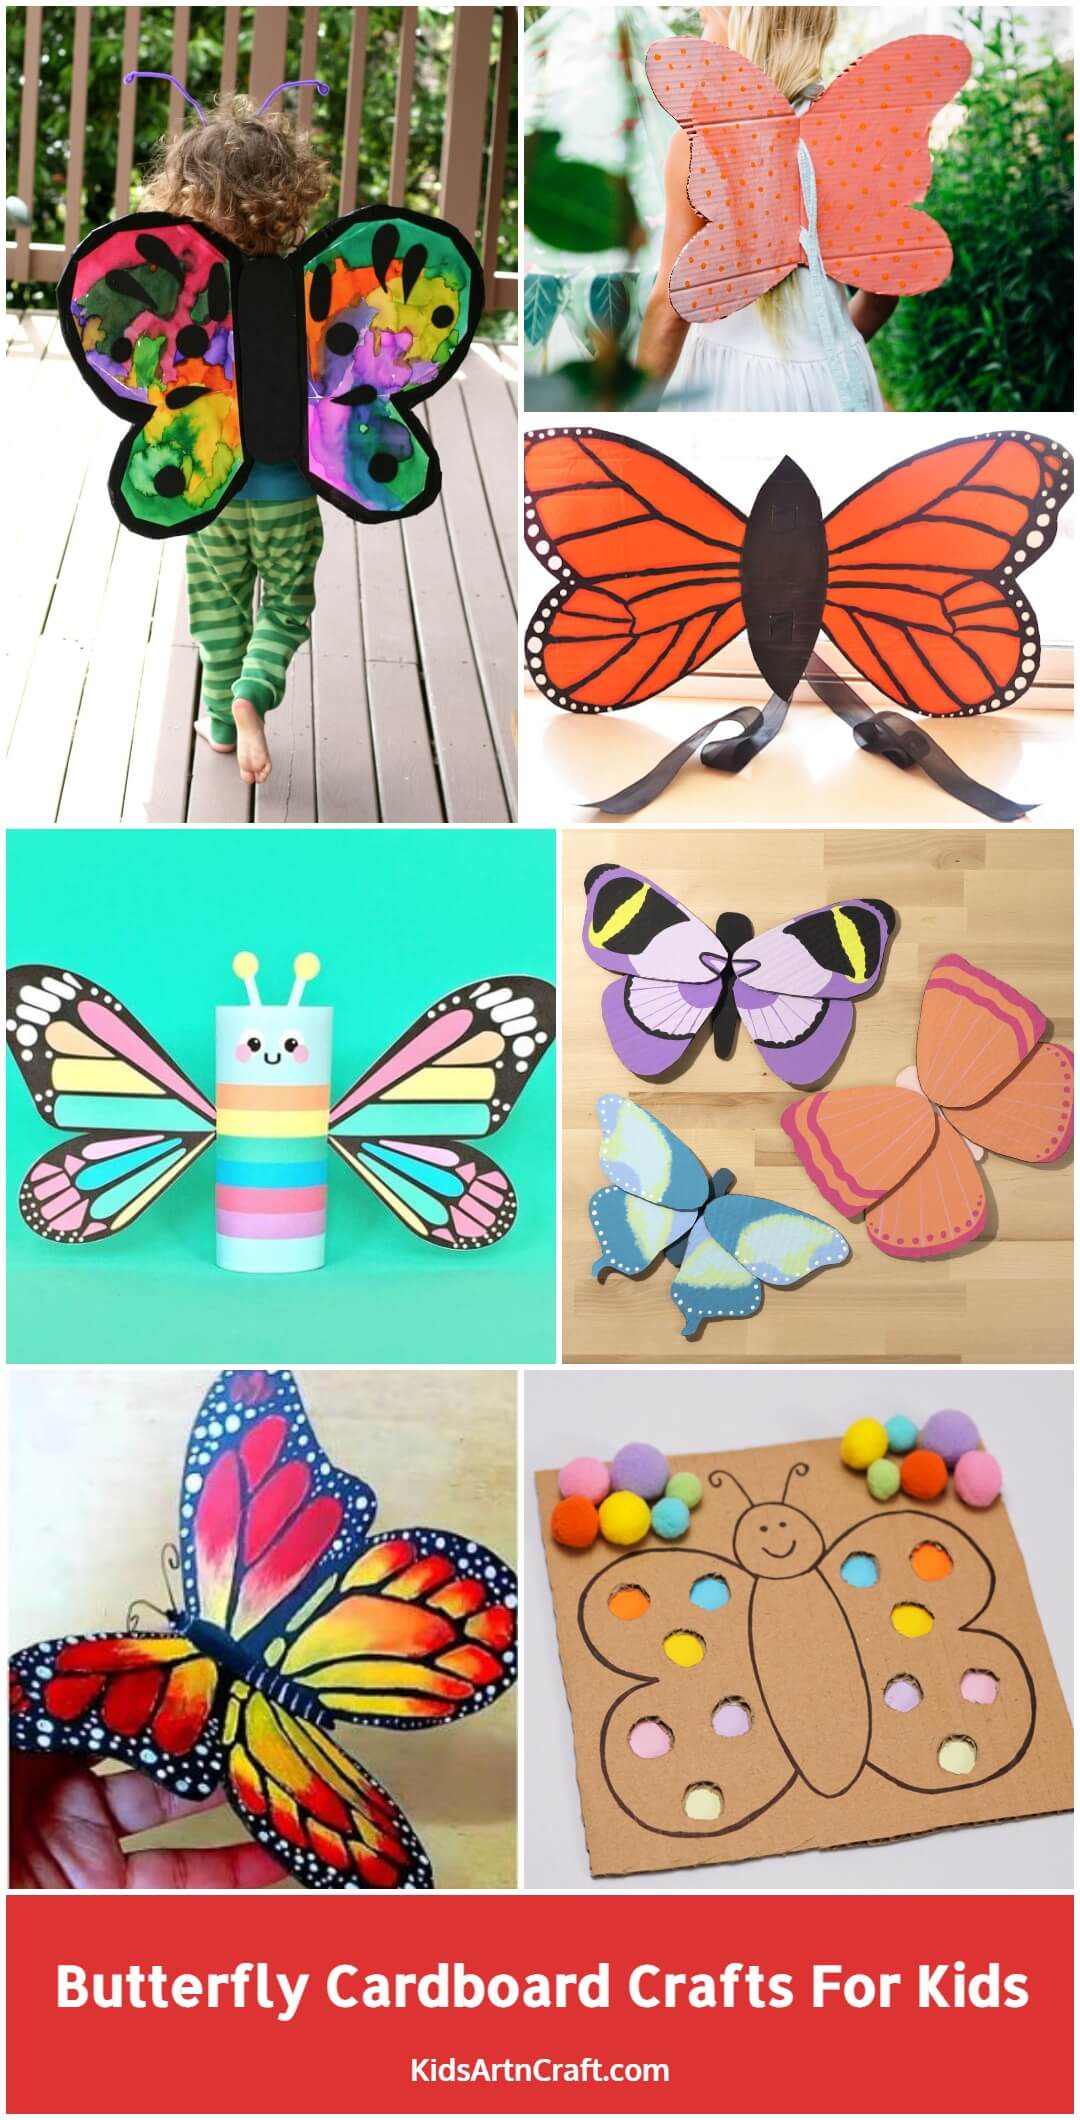 Butterfly Cardboard Crafts for Kids